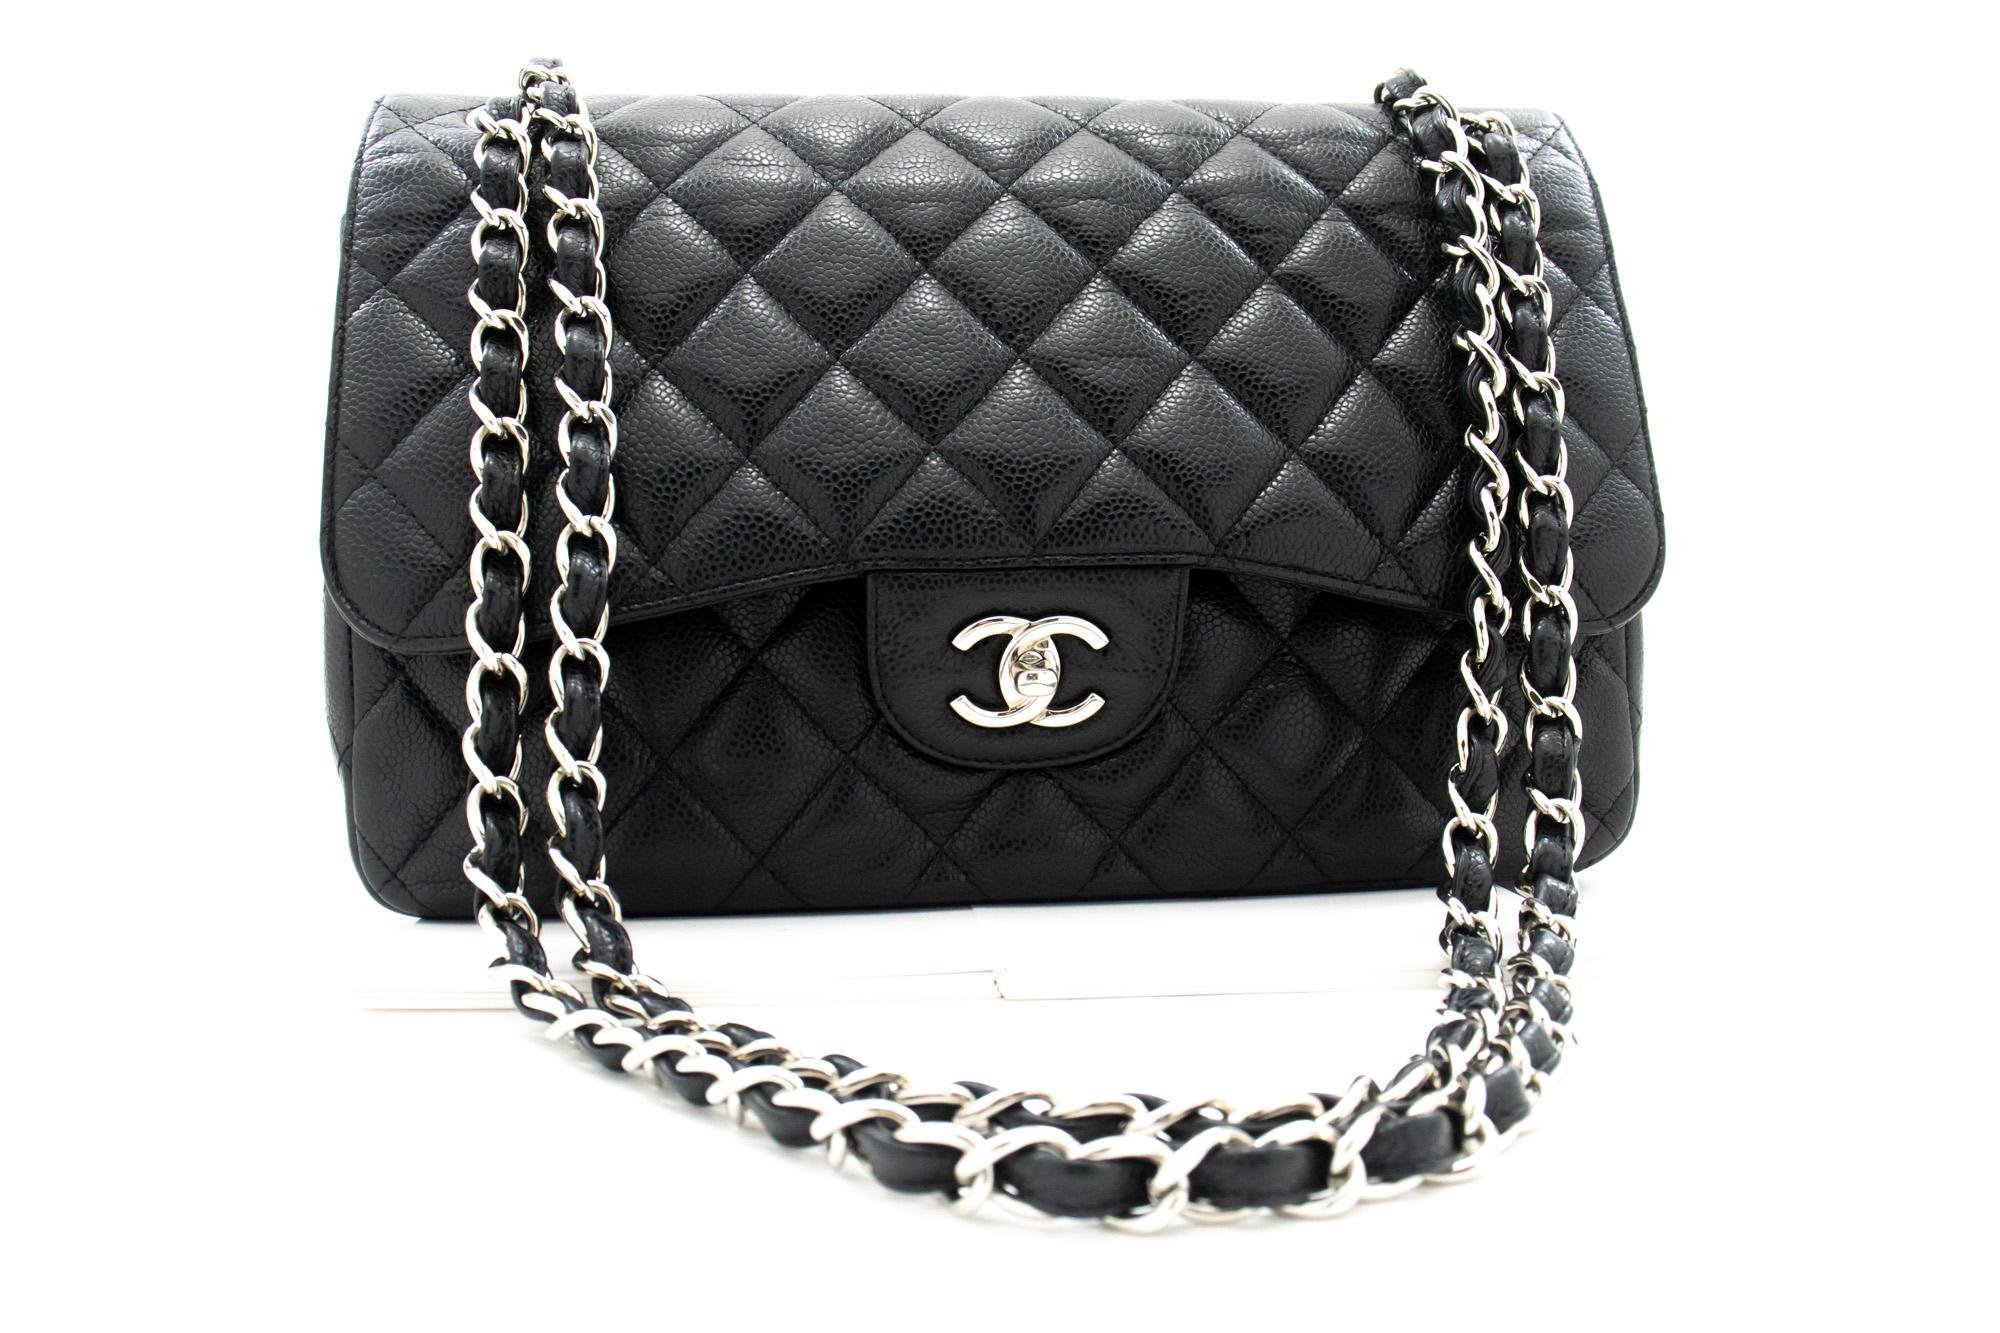 An authentic CHANEL Grained Calfskin Large Chain Shoulder Bag W Flap Silver Classic. The color is Black. The outside material is Leather. The pattern is Solid. This item is Contemporary. The year of manufacture would be 2015.
Conditions &